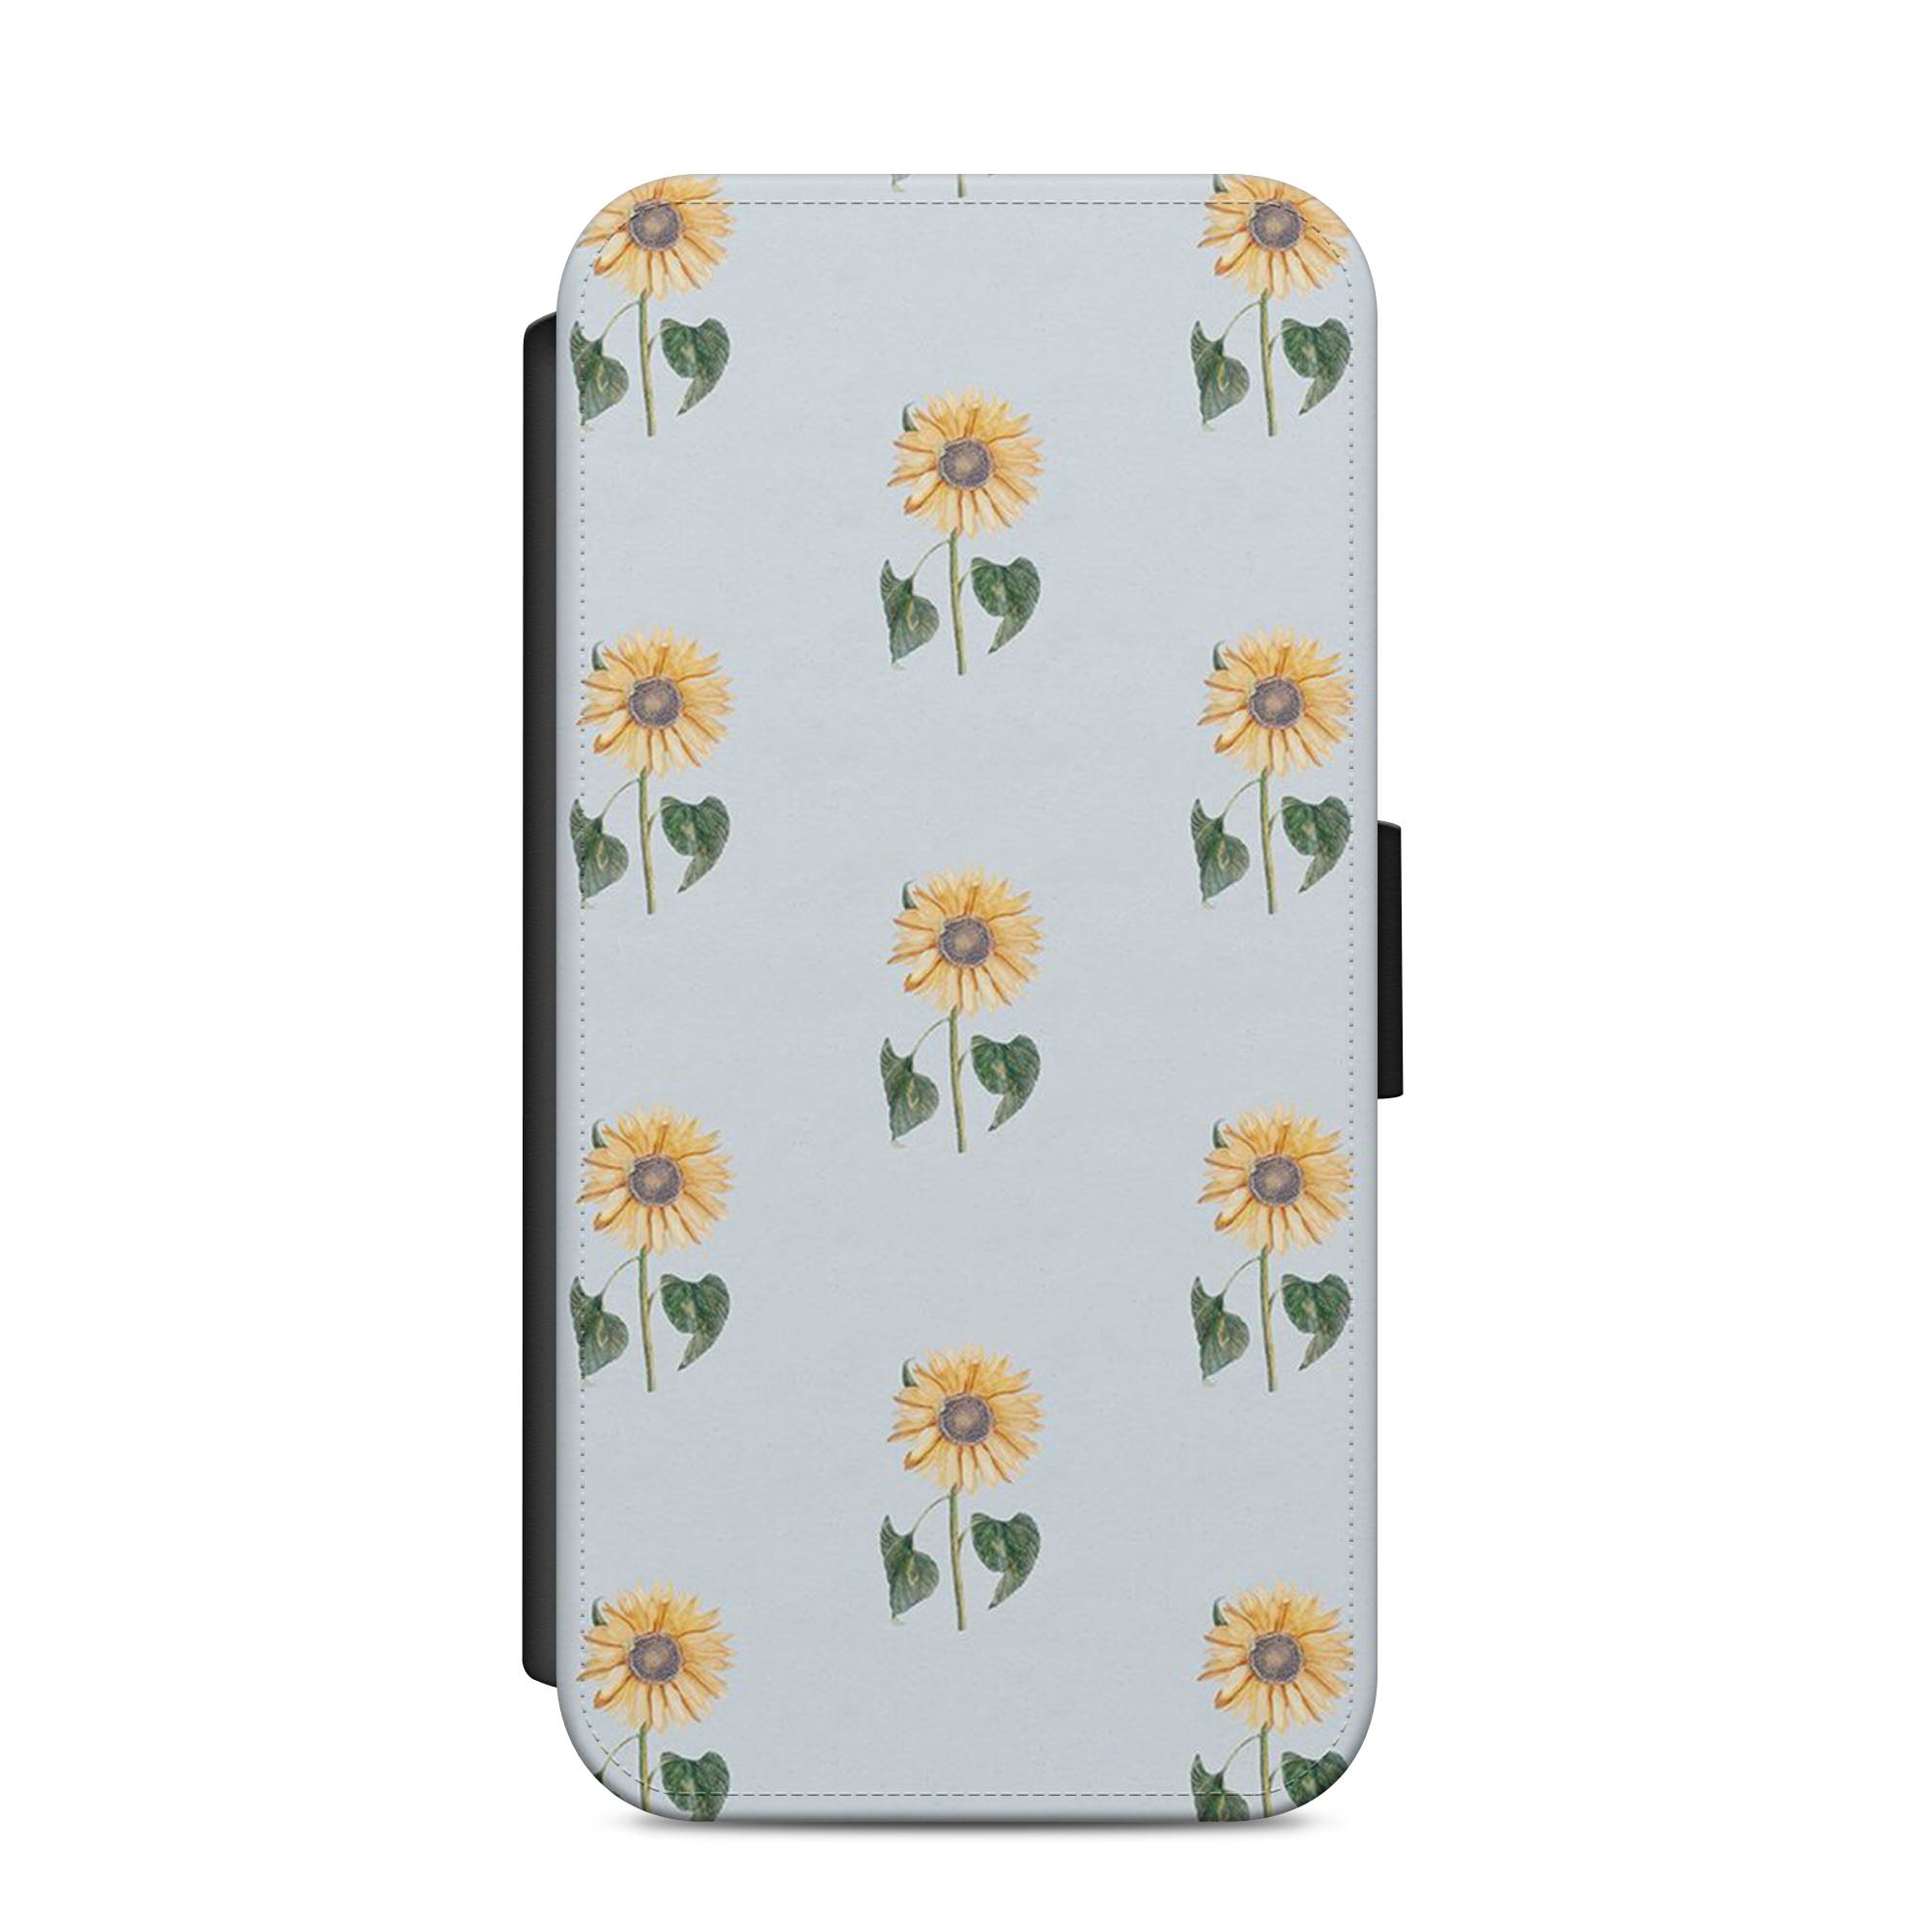 Sunflowers Faux Leather Flip Case Wallet for iPhone / Samsung